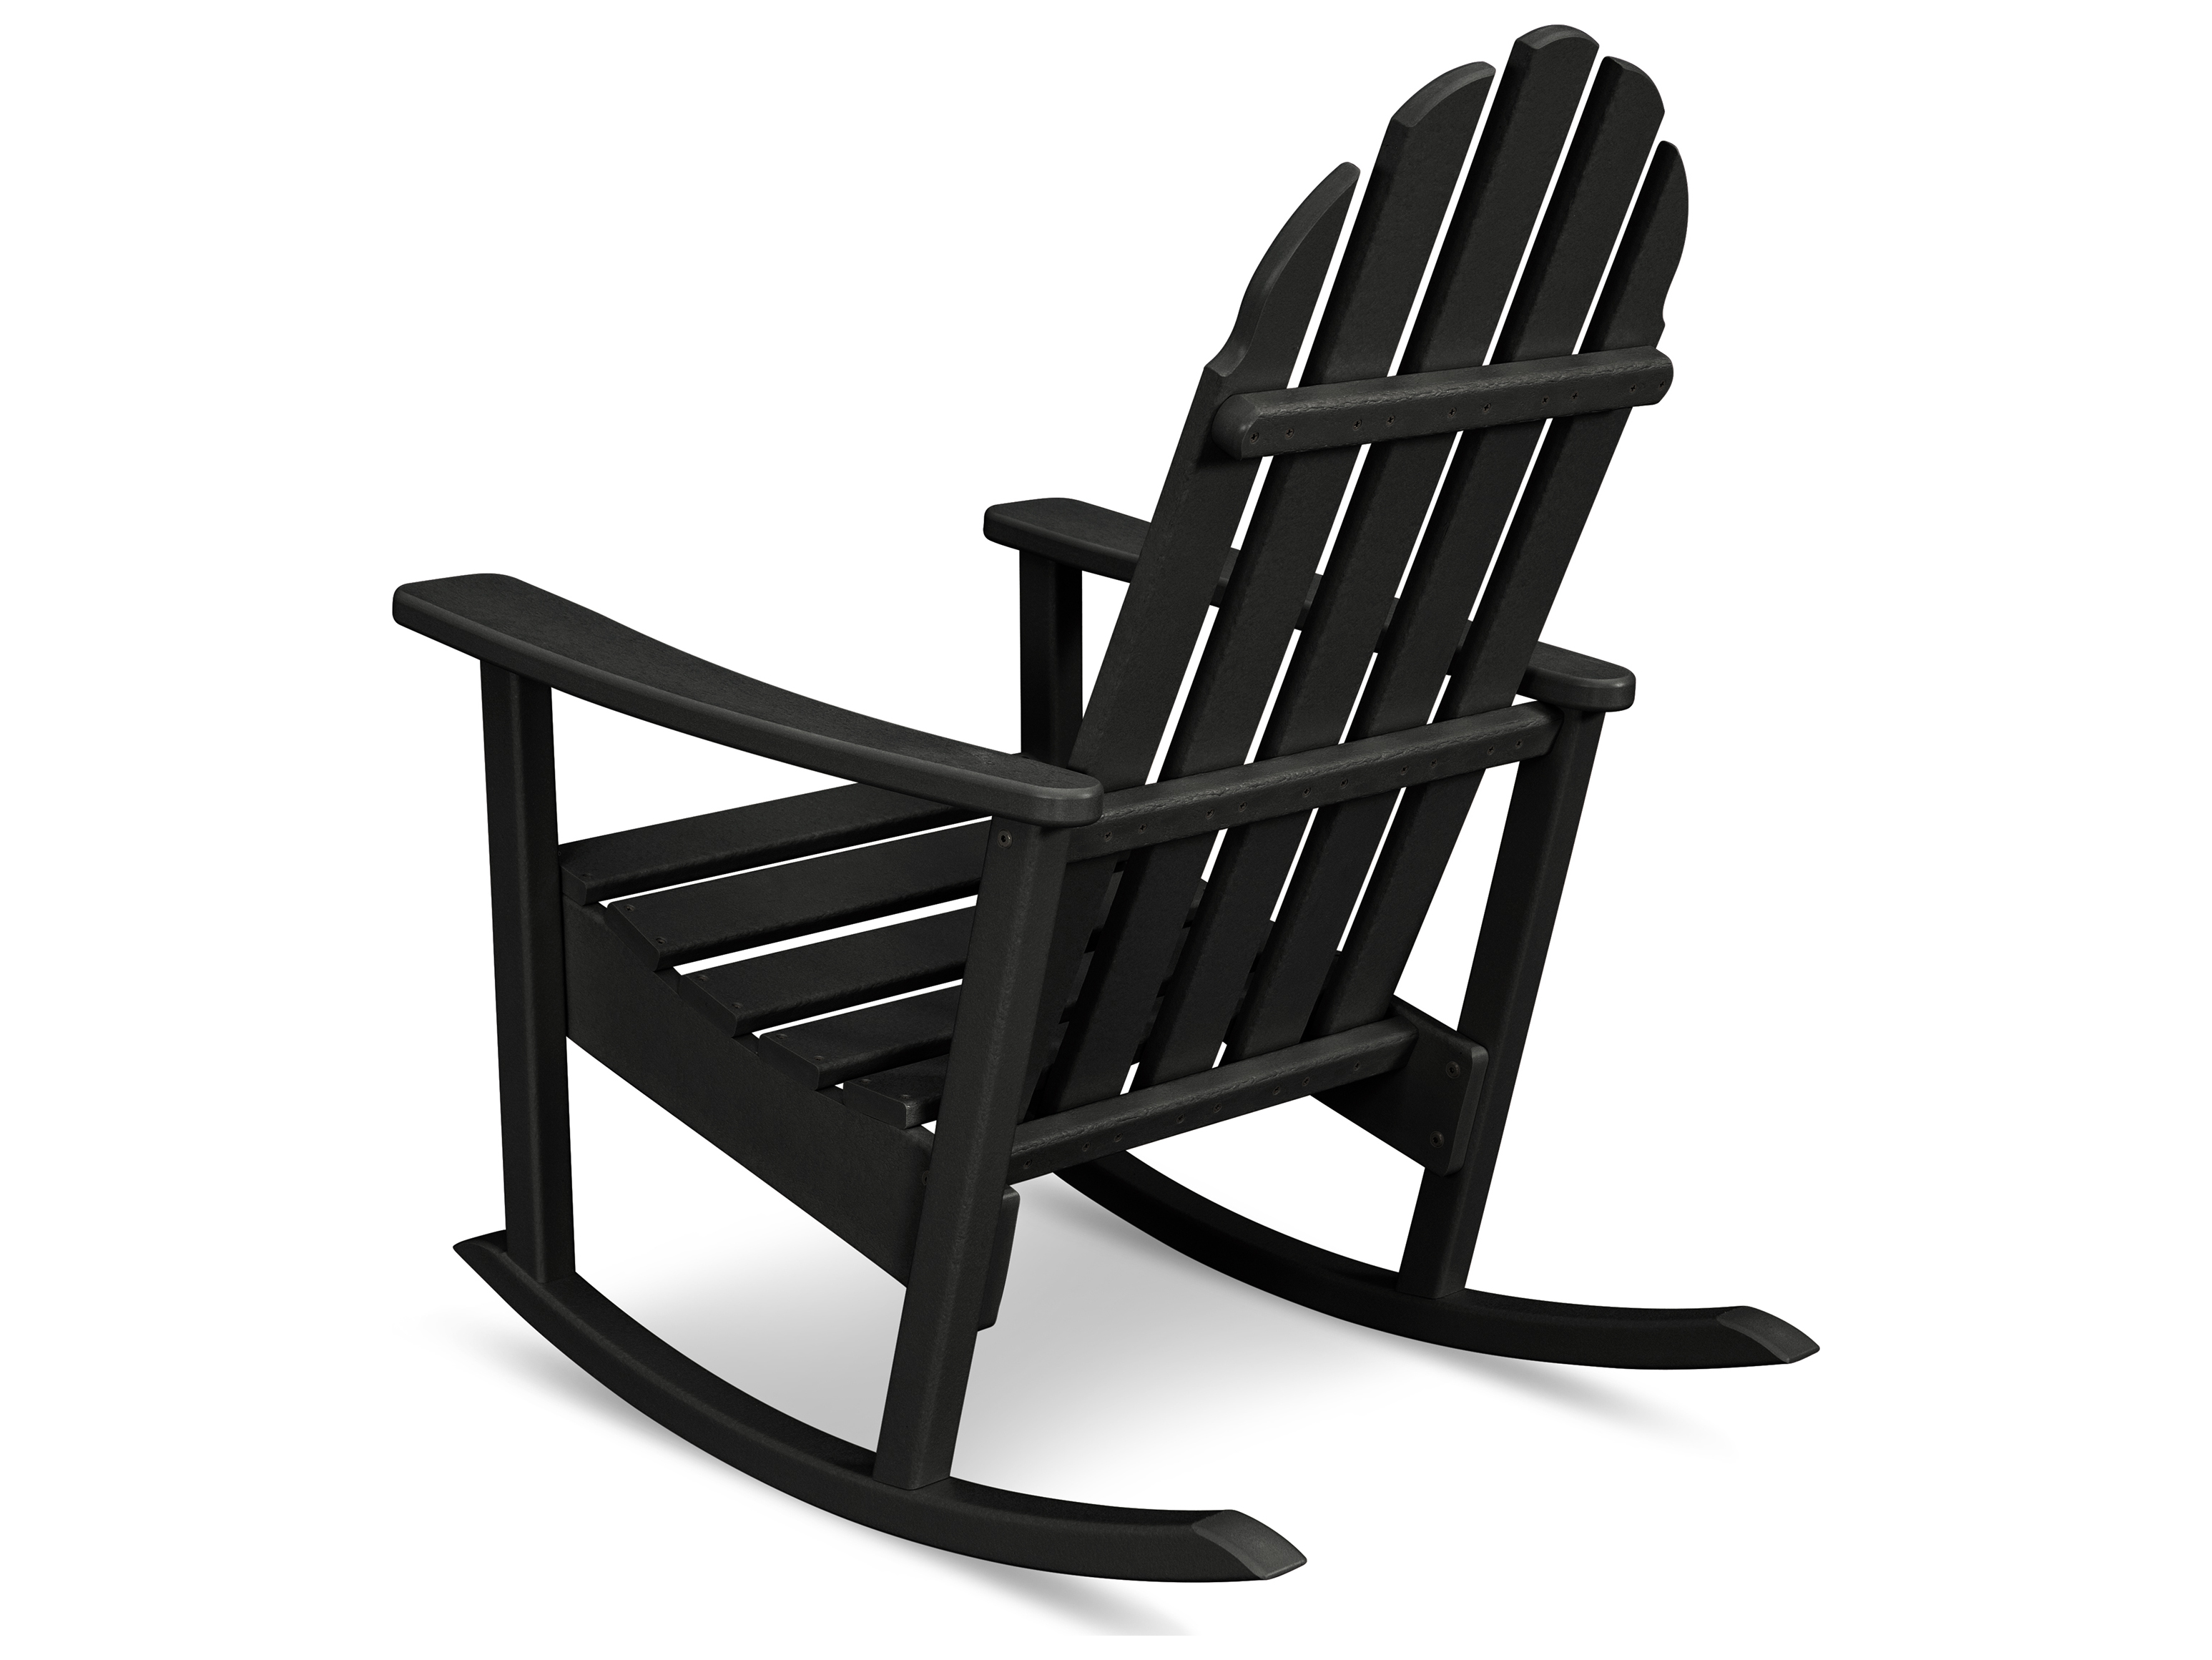 Trex® Outdoor Furniture Cape Cod Adirondack Rocking Chair in Charcoal